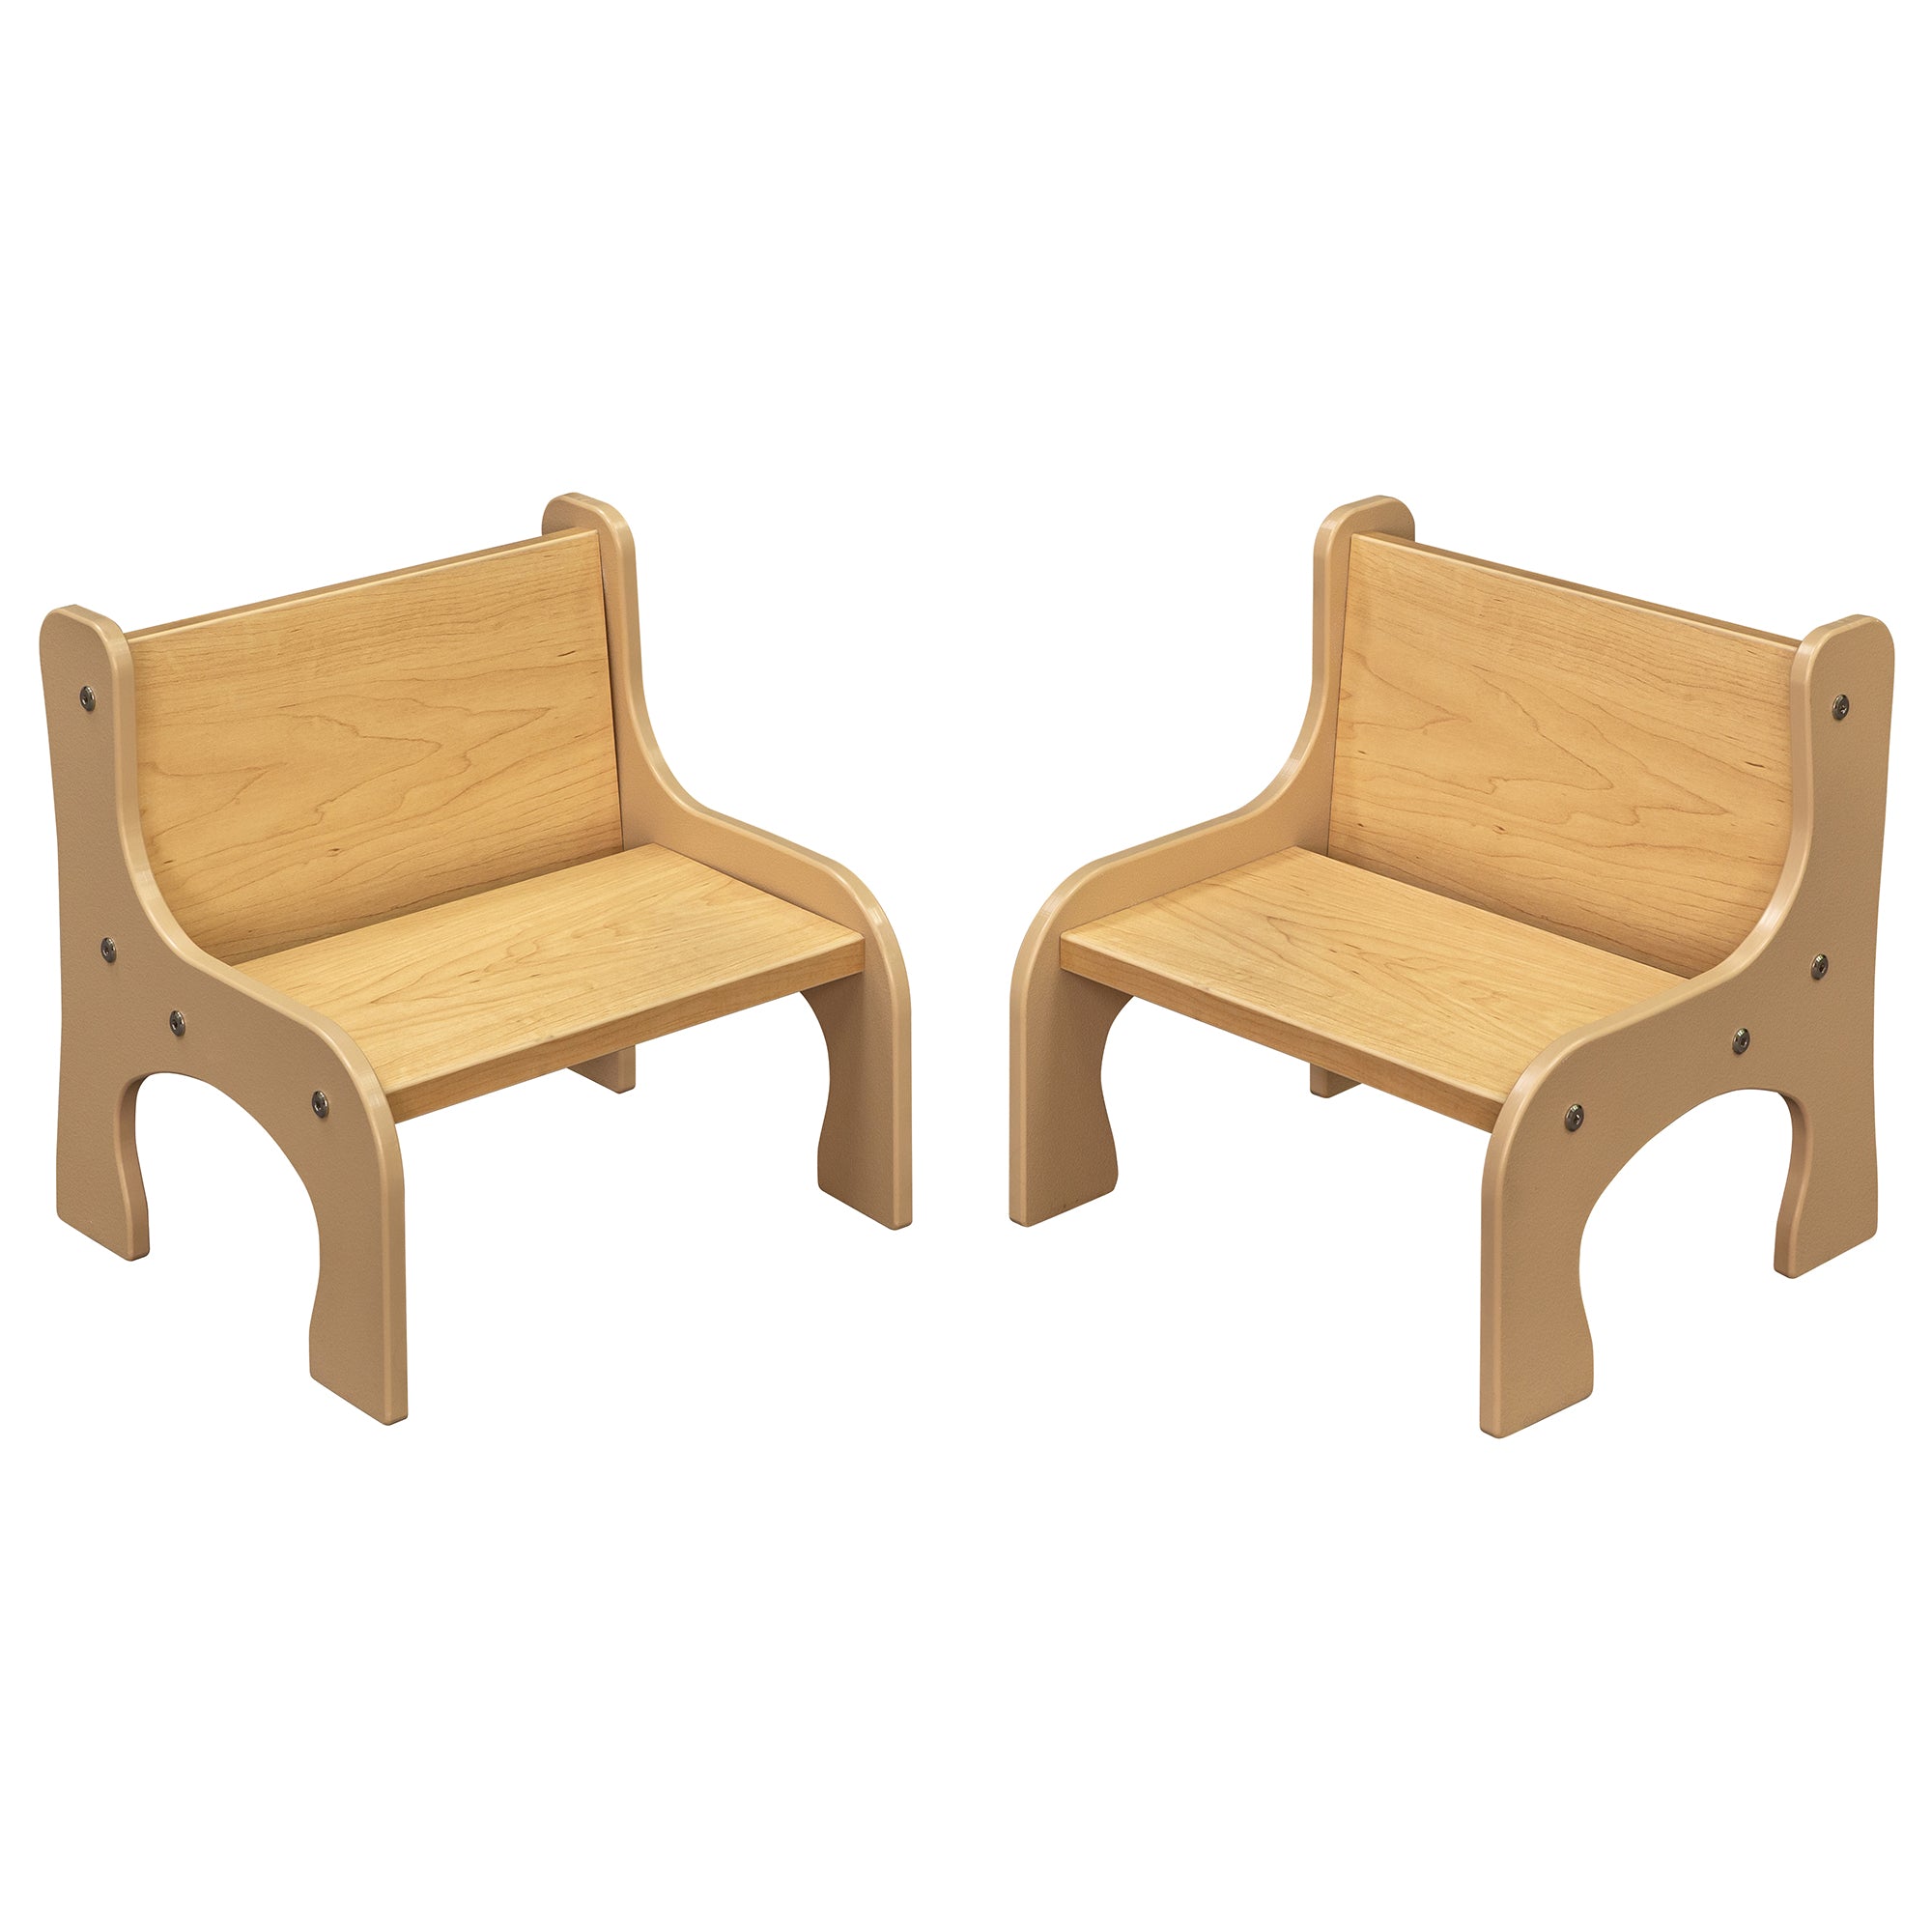 6" Activity Chair - Set of 2